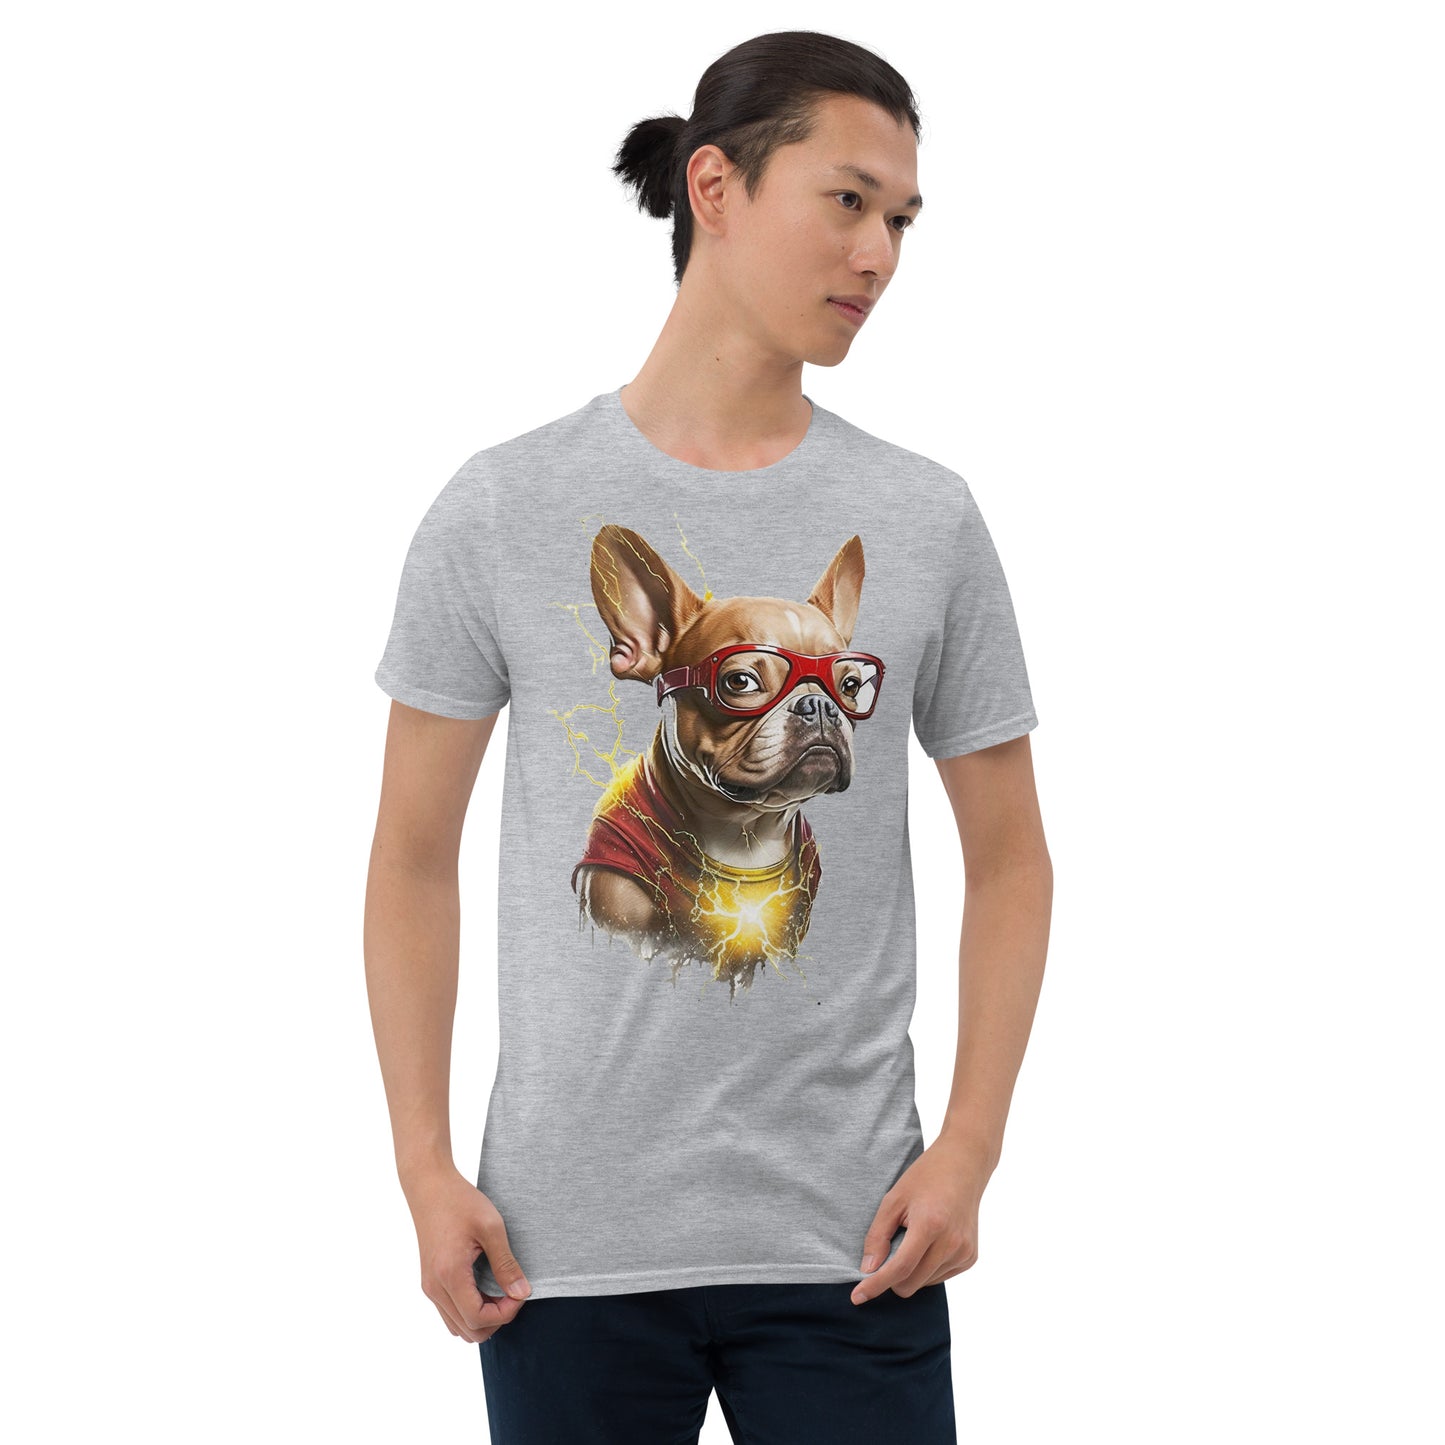 Unisex Frenchie Spirit Tee: Express Your Canine Admiration in Style